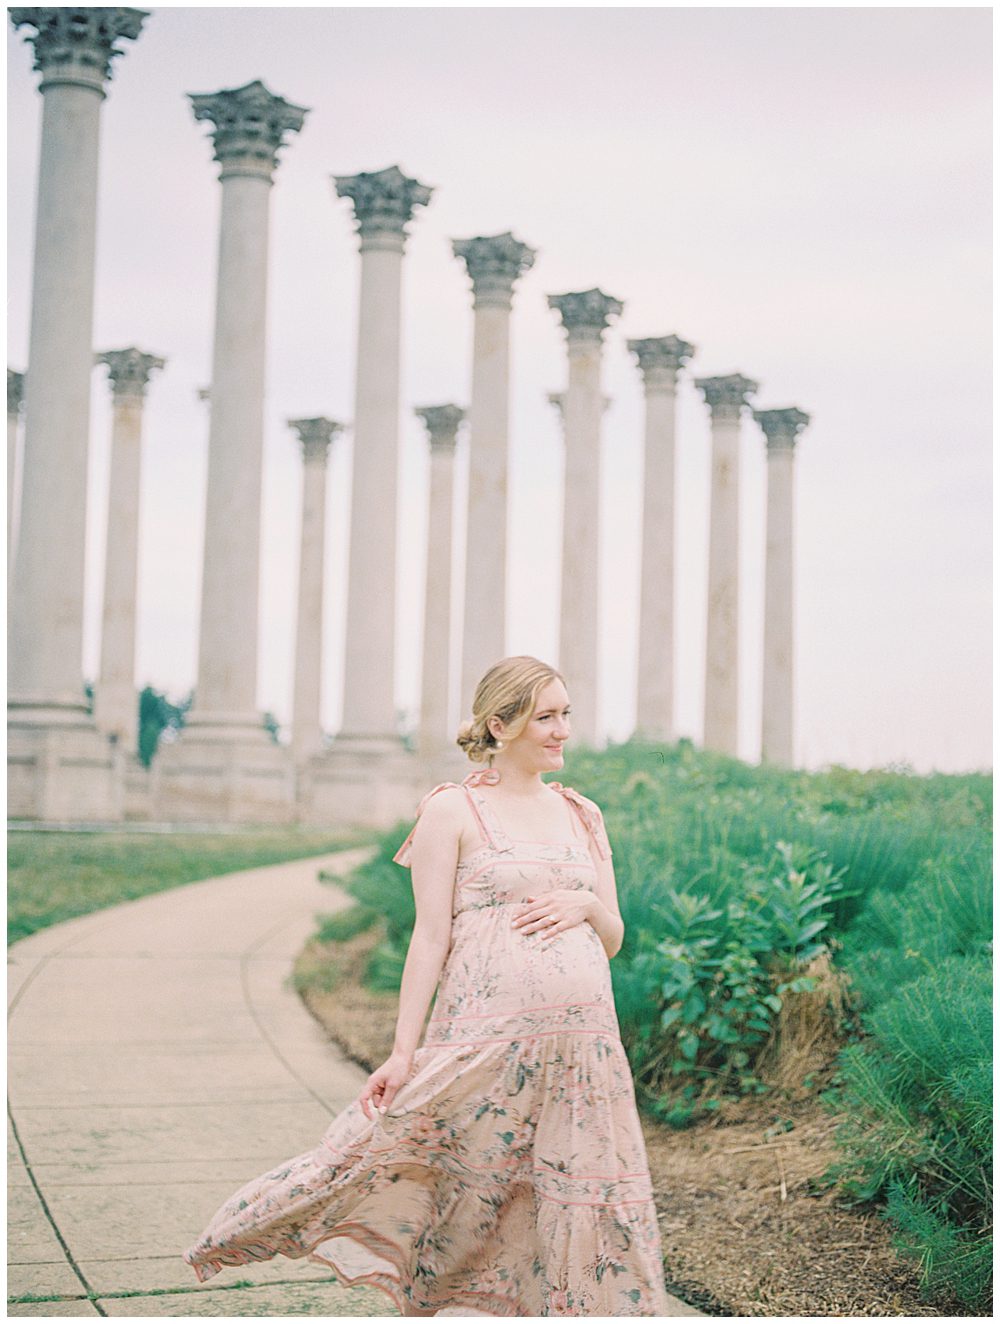 Pregnant mother in pink Zimmerman floral dress walks in front of the columns during her National Arboretum maternity session.